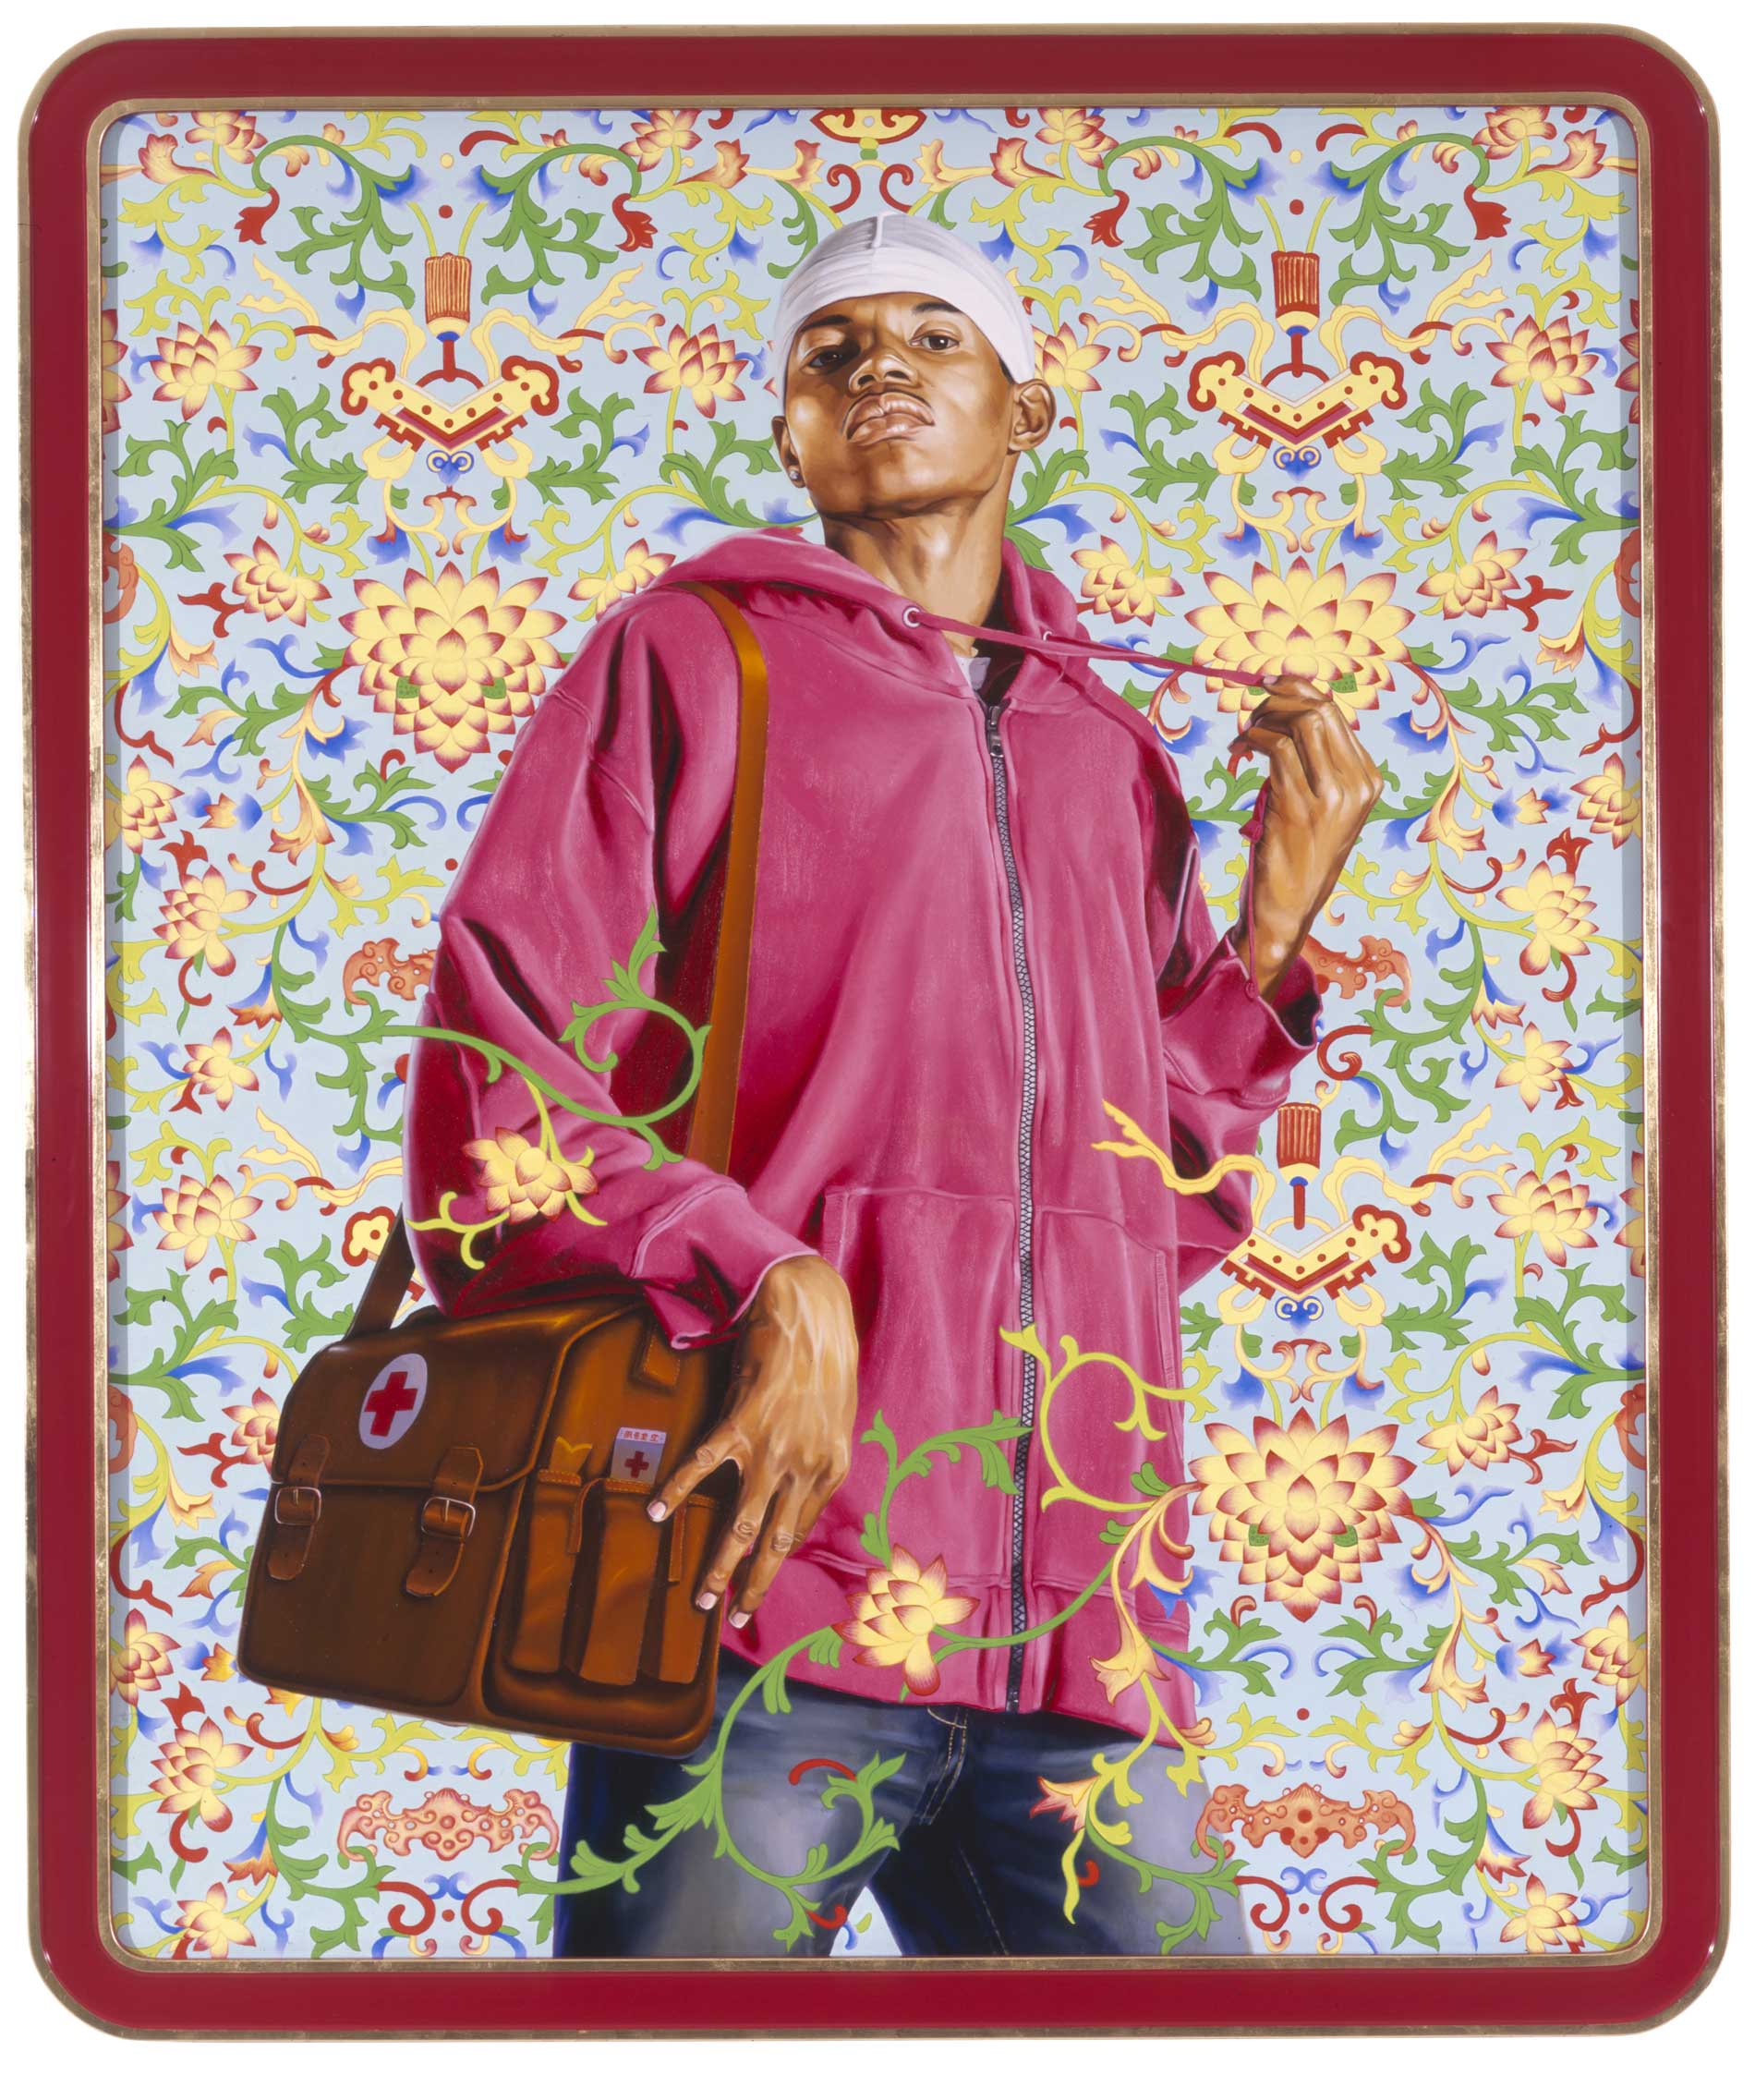 Kehinde Wiley | A New Republic, Brooklyn Museum, New York City, USA,  February 20- May 24, 2015 | Support the Rural Population and Serve 500 Million Peasants, 2007, Oil and Enamel on Canvas. | 18